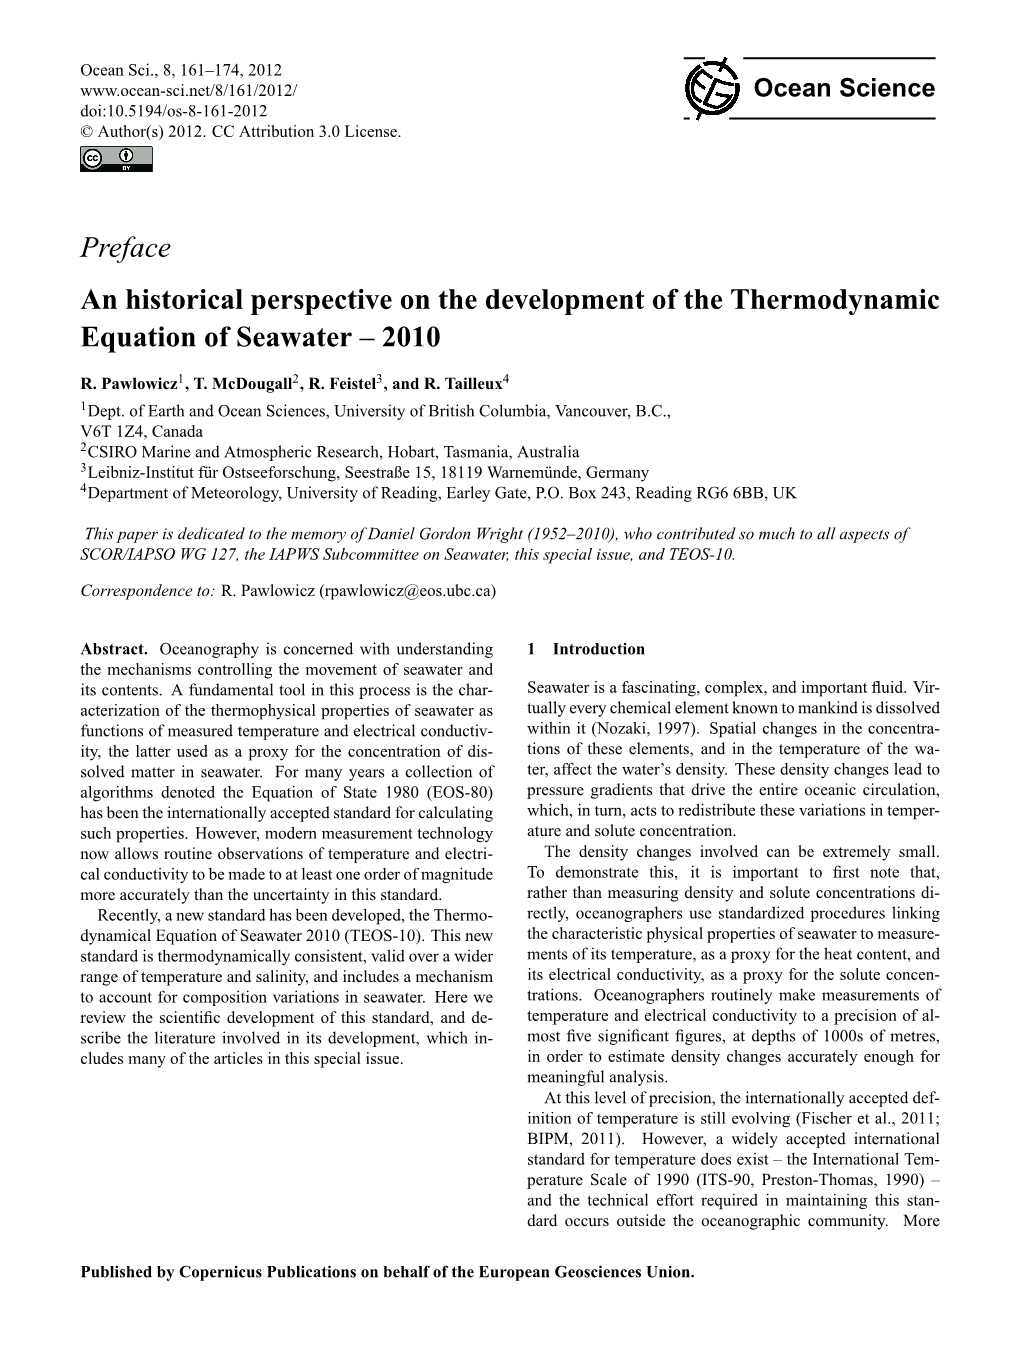 Preface an Historical Perspective on the Development of the Thermodynamic Equation of Seawater – 2010